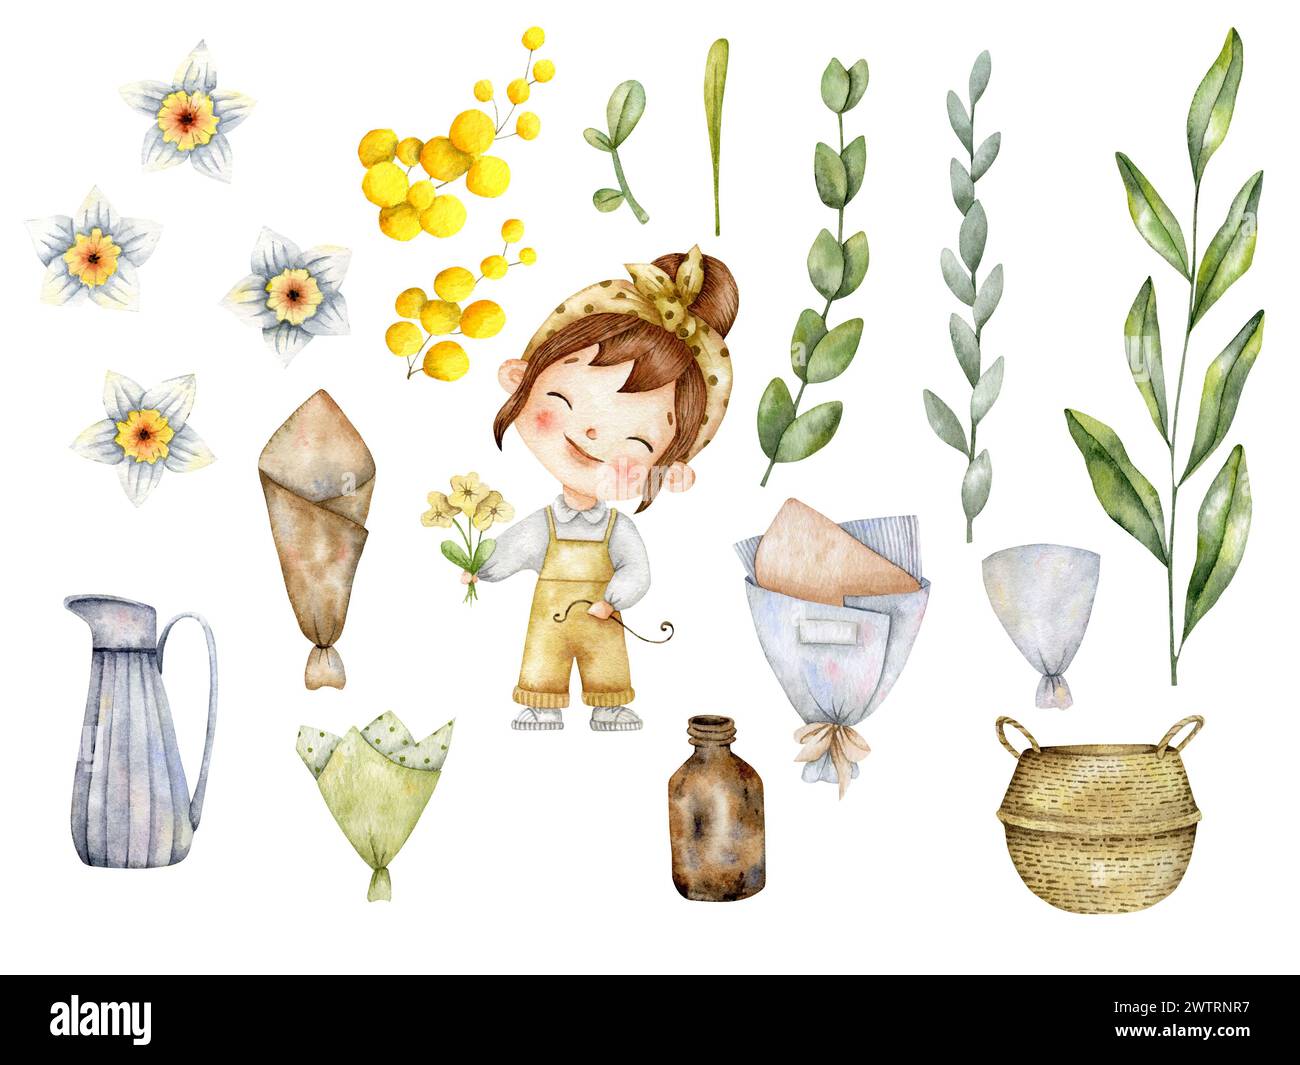 Hand-drawn watercolor illustration with florist girl and flowers, leaves, packing, vases for bouquets. Flower shop set for decorating and designing so Stock Photo